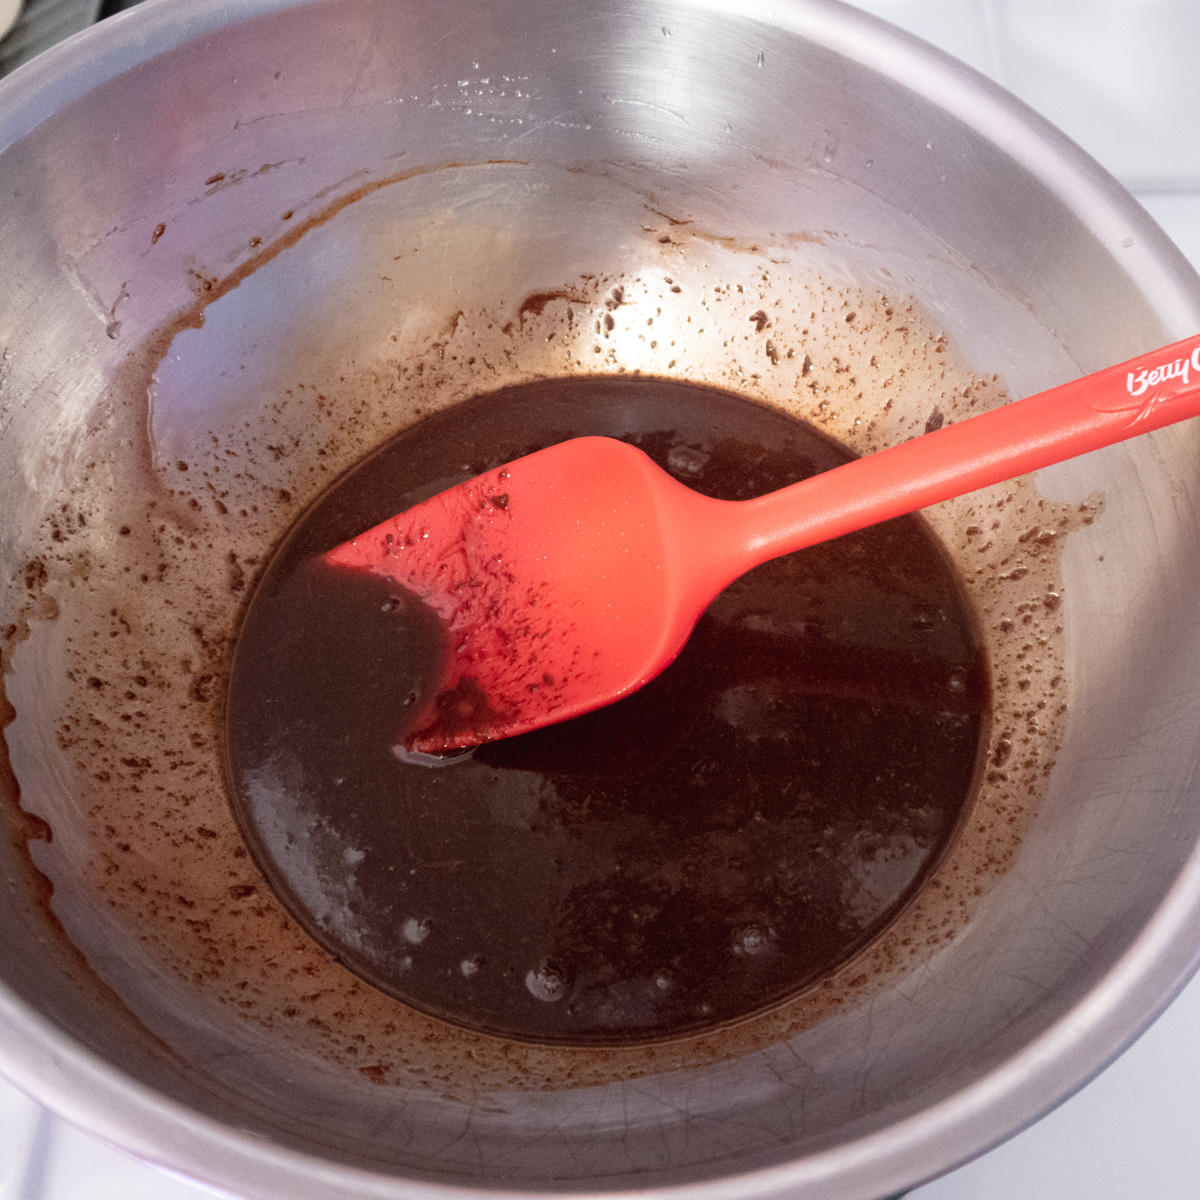 Chocolate slowly melting into a hot sugar syrup and looking split.